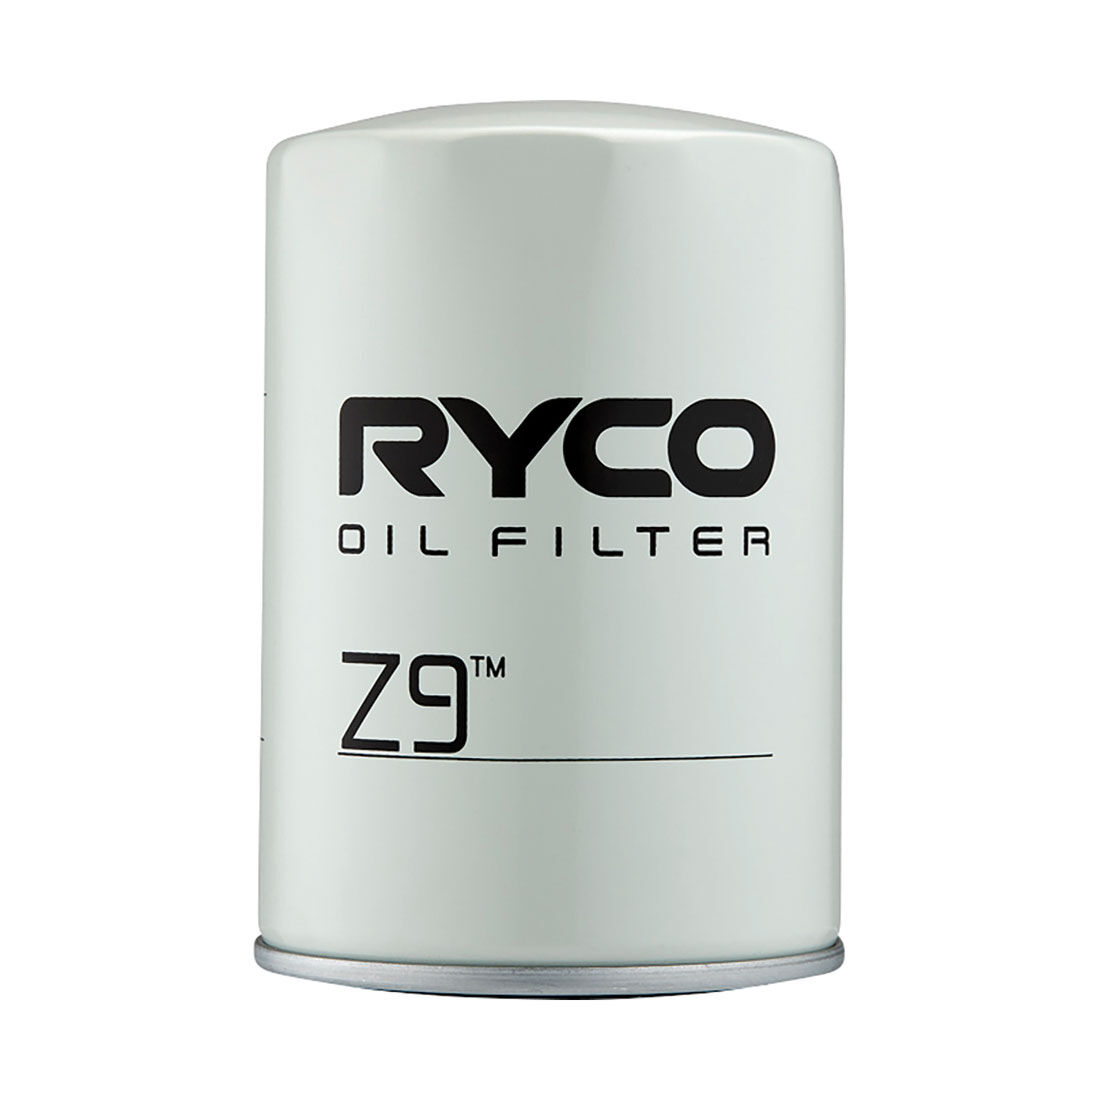 Ryco Filter Service Kit Includes Cabin Air Filter - RSK56C, , scaau_hi-res